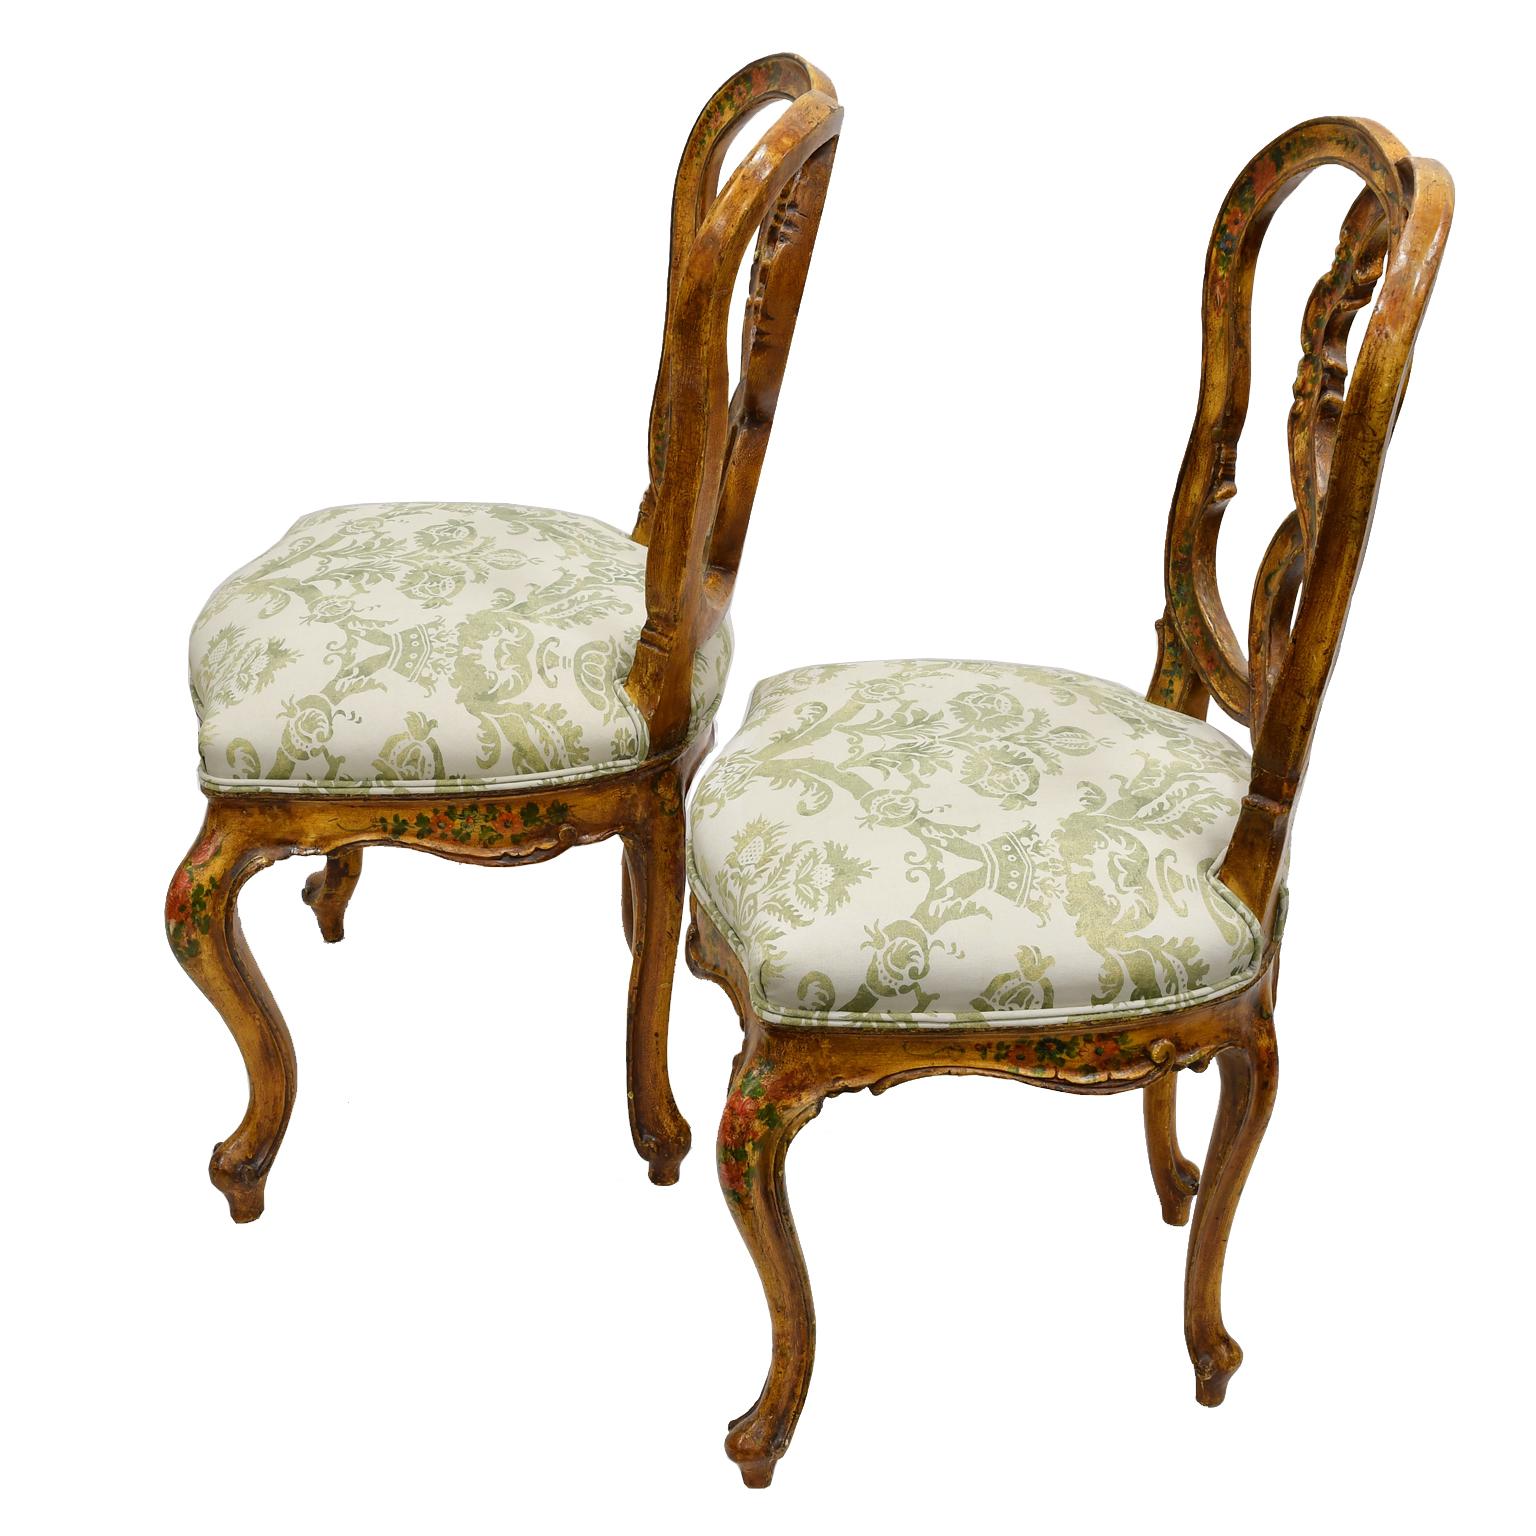 Baroque Pair of Antique Venetian Dining Chairs in Yellow Paint with Flowers & Upholstery